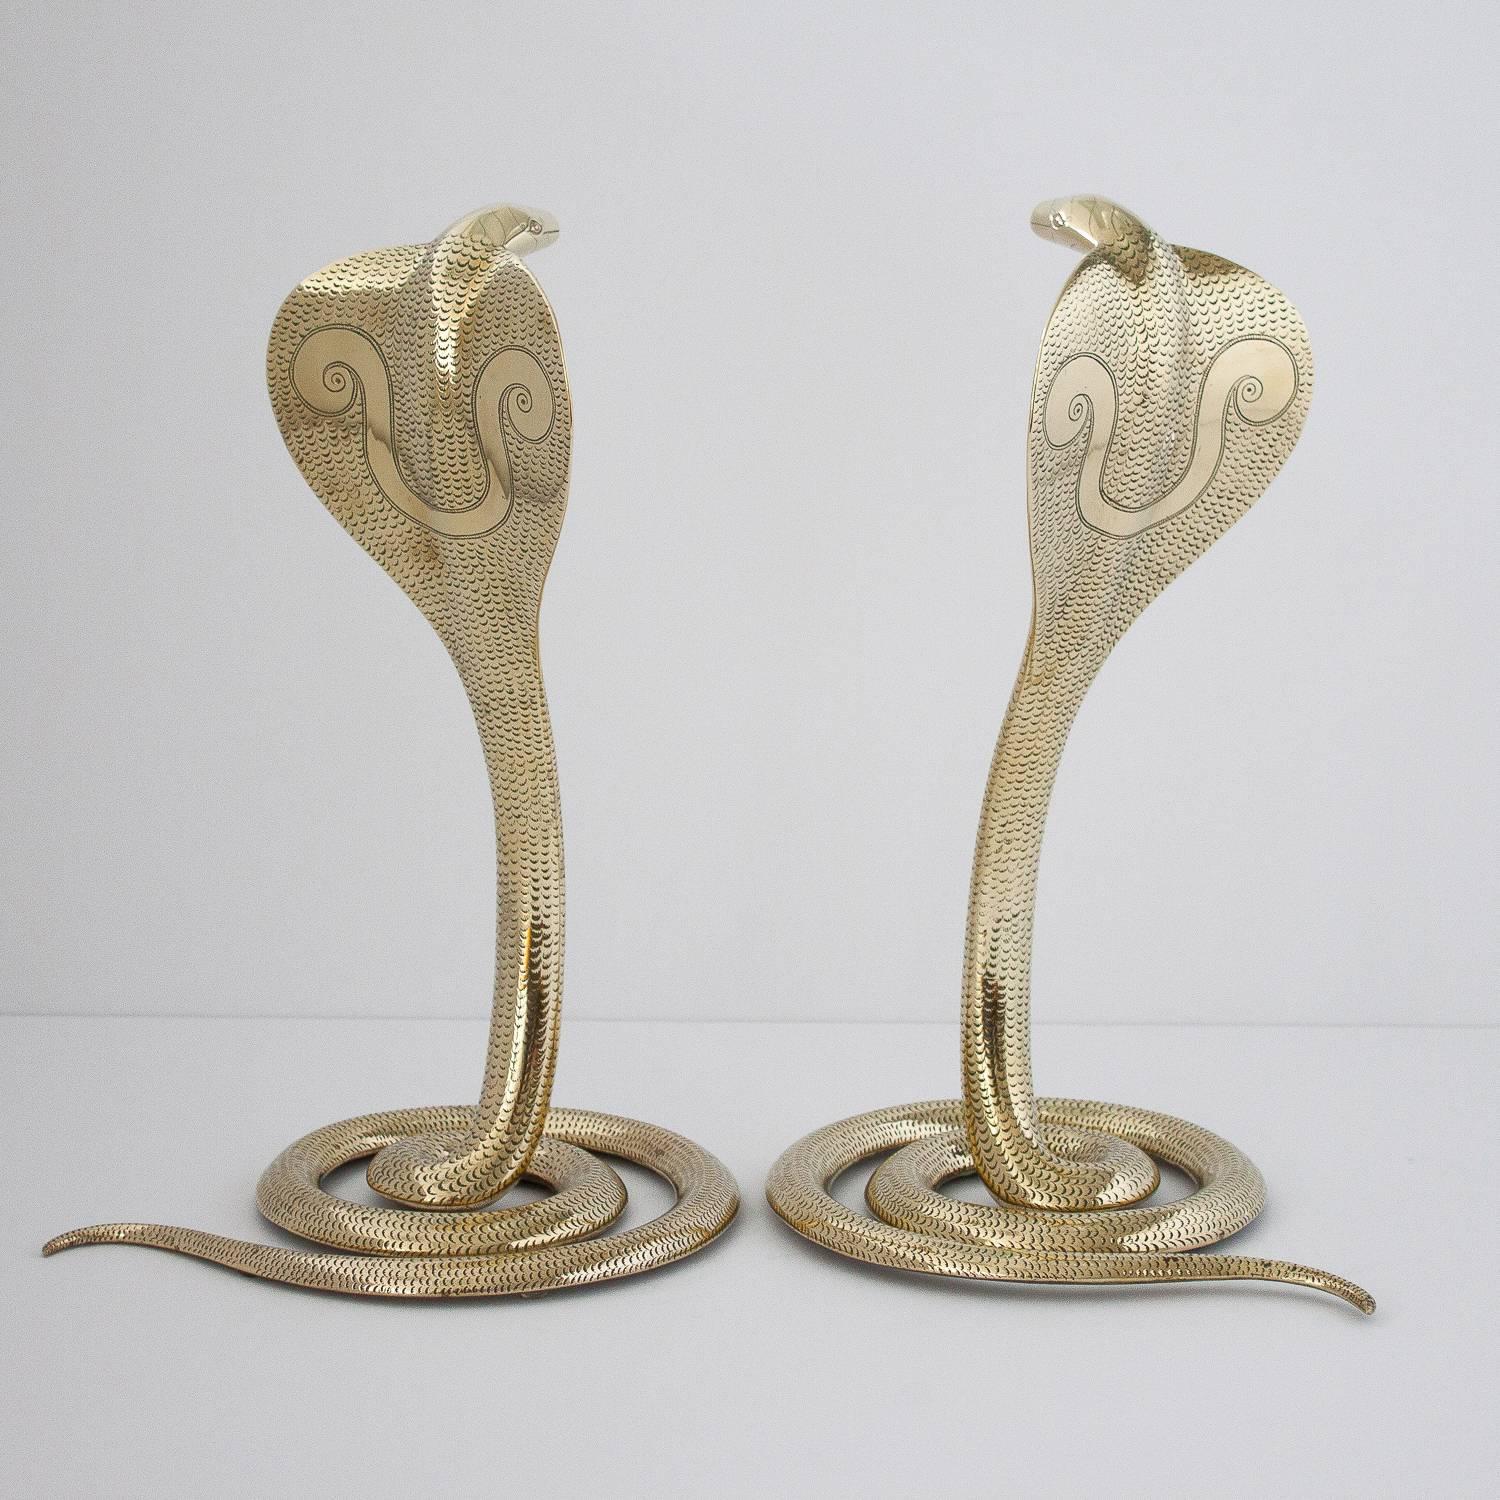 Polished Pair of Solid Brass Cobra Sculptures or Andirons